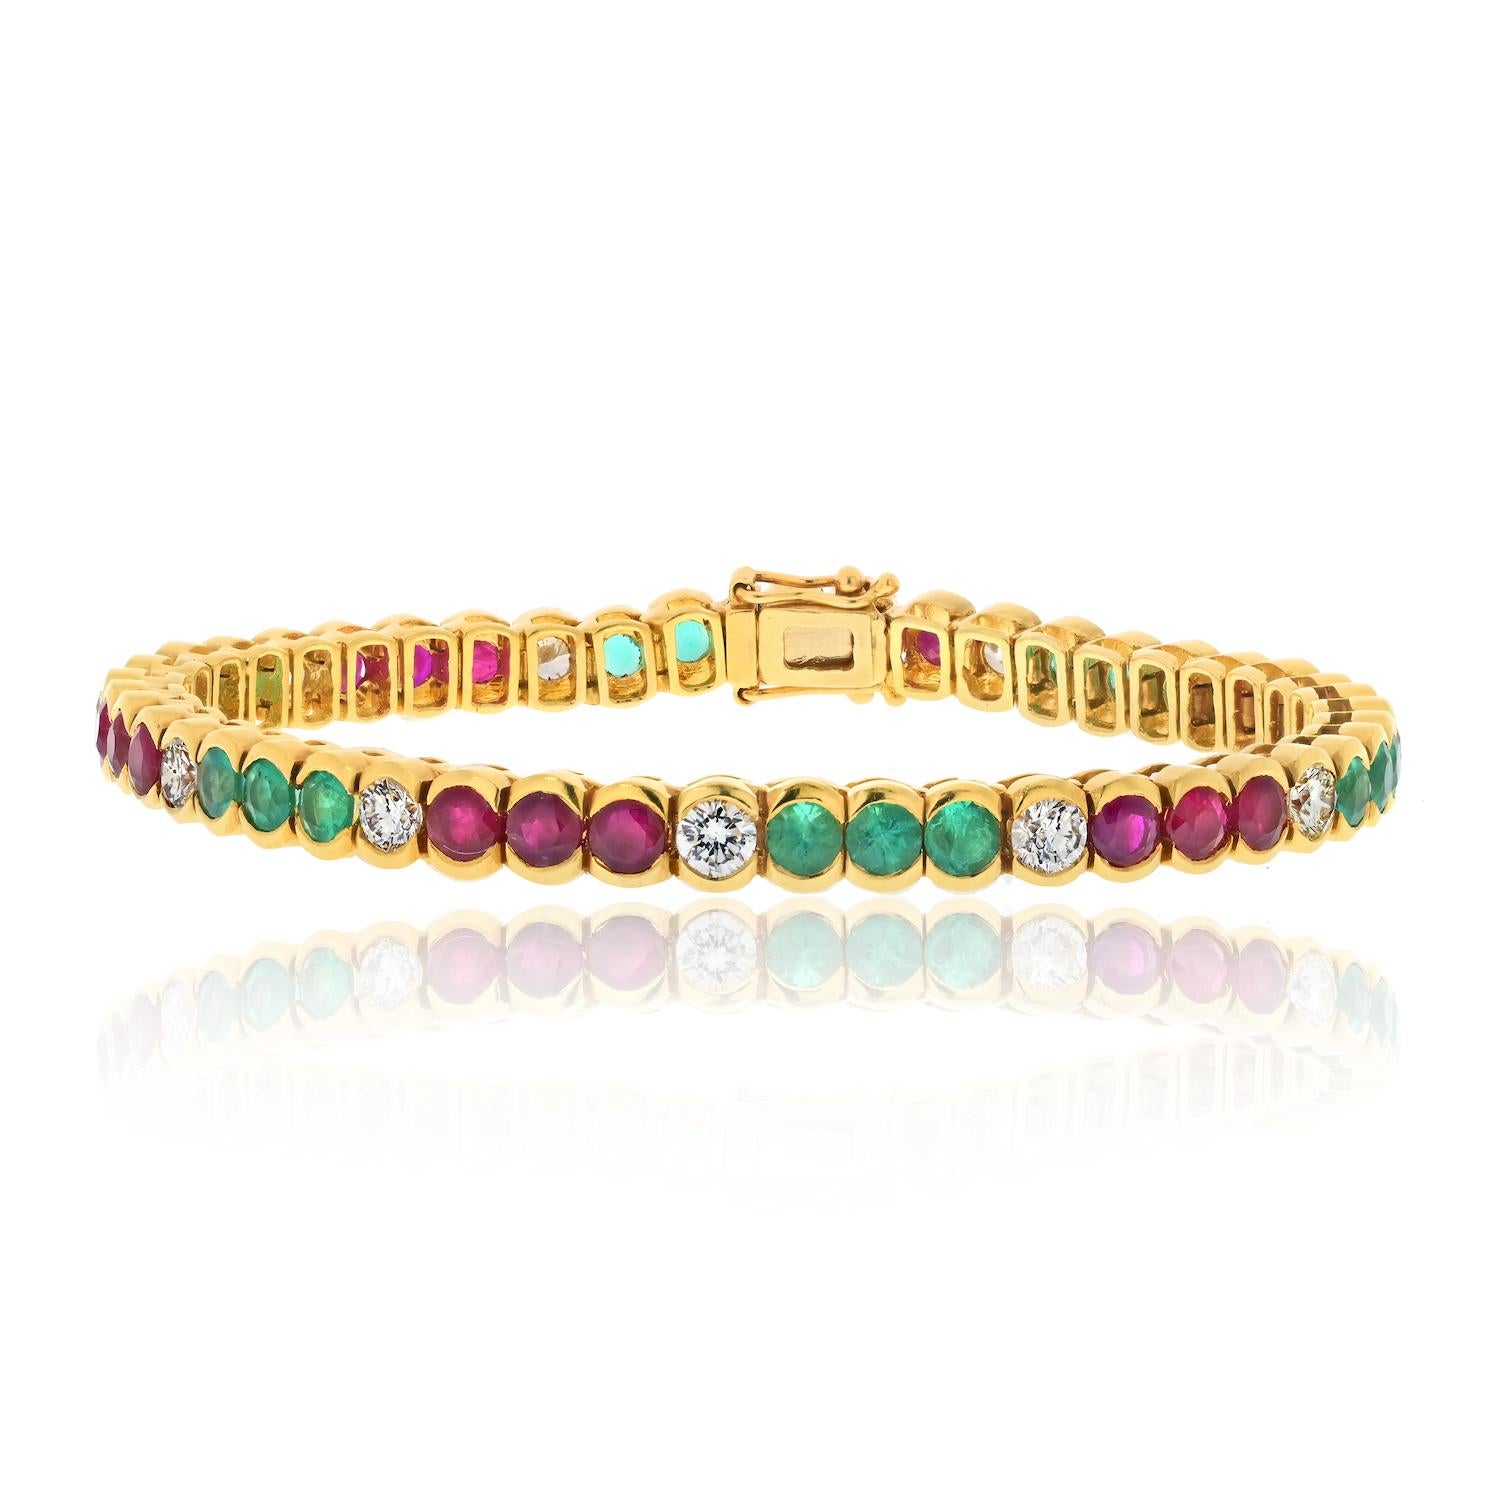 Elevate your wrist with the exquisite beauty of this 18K Yellow Gold Diamond, Emerald, and Ruby Bezel Set Tennis Bracelet. A harmonious blend of vibrant gemstones and brilliant diamonds comes together to create a piece of jewelry that radiates